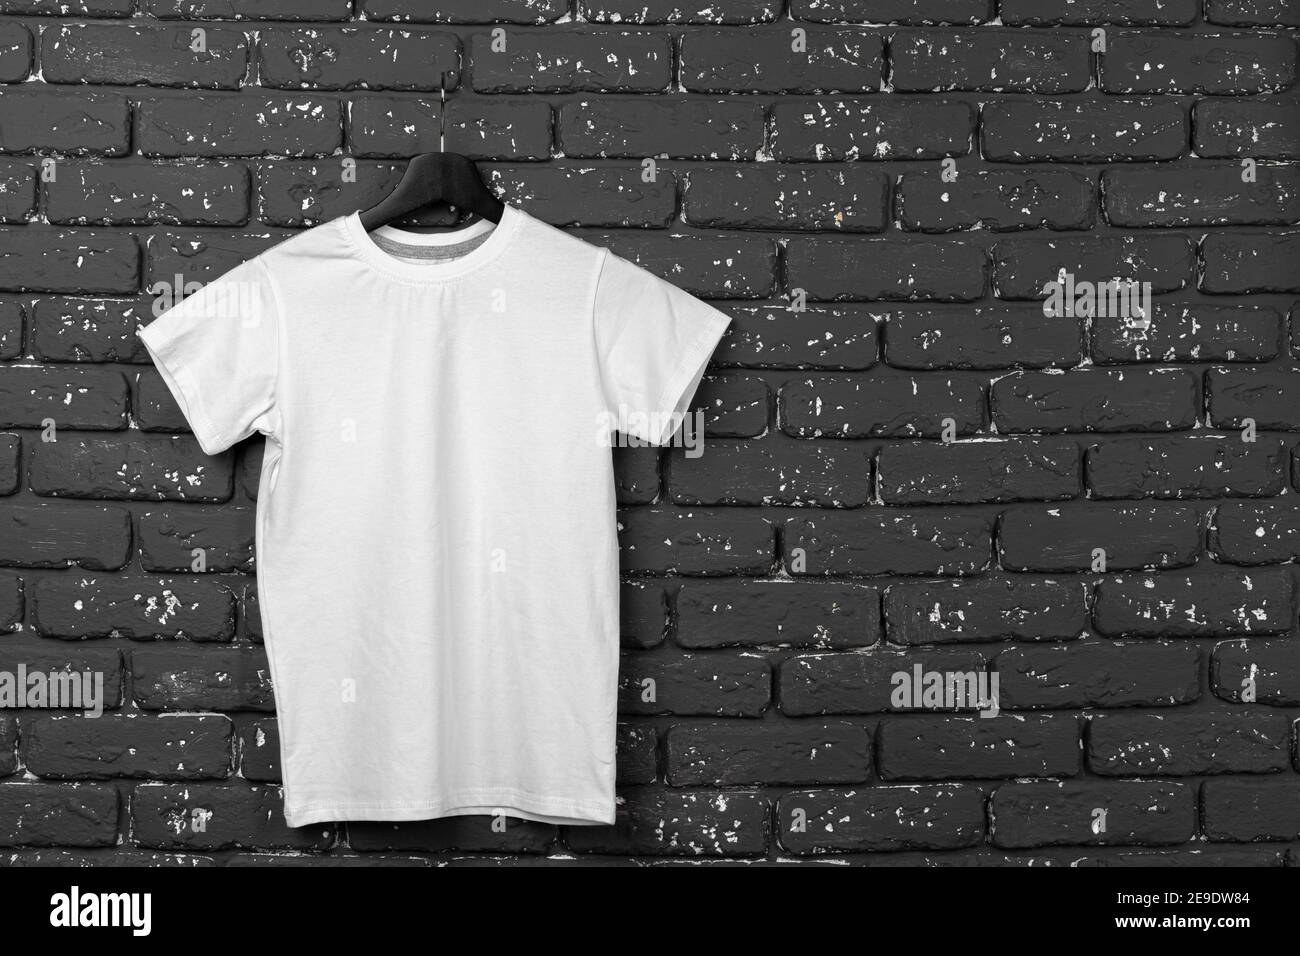 White t-shirt hanging on hanger against brick wall Stock Photo - Alamy